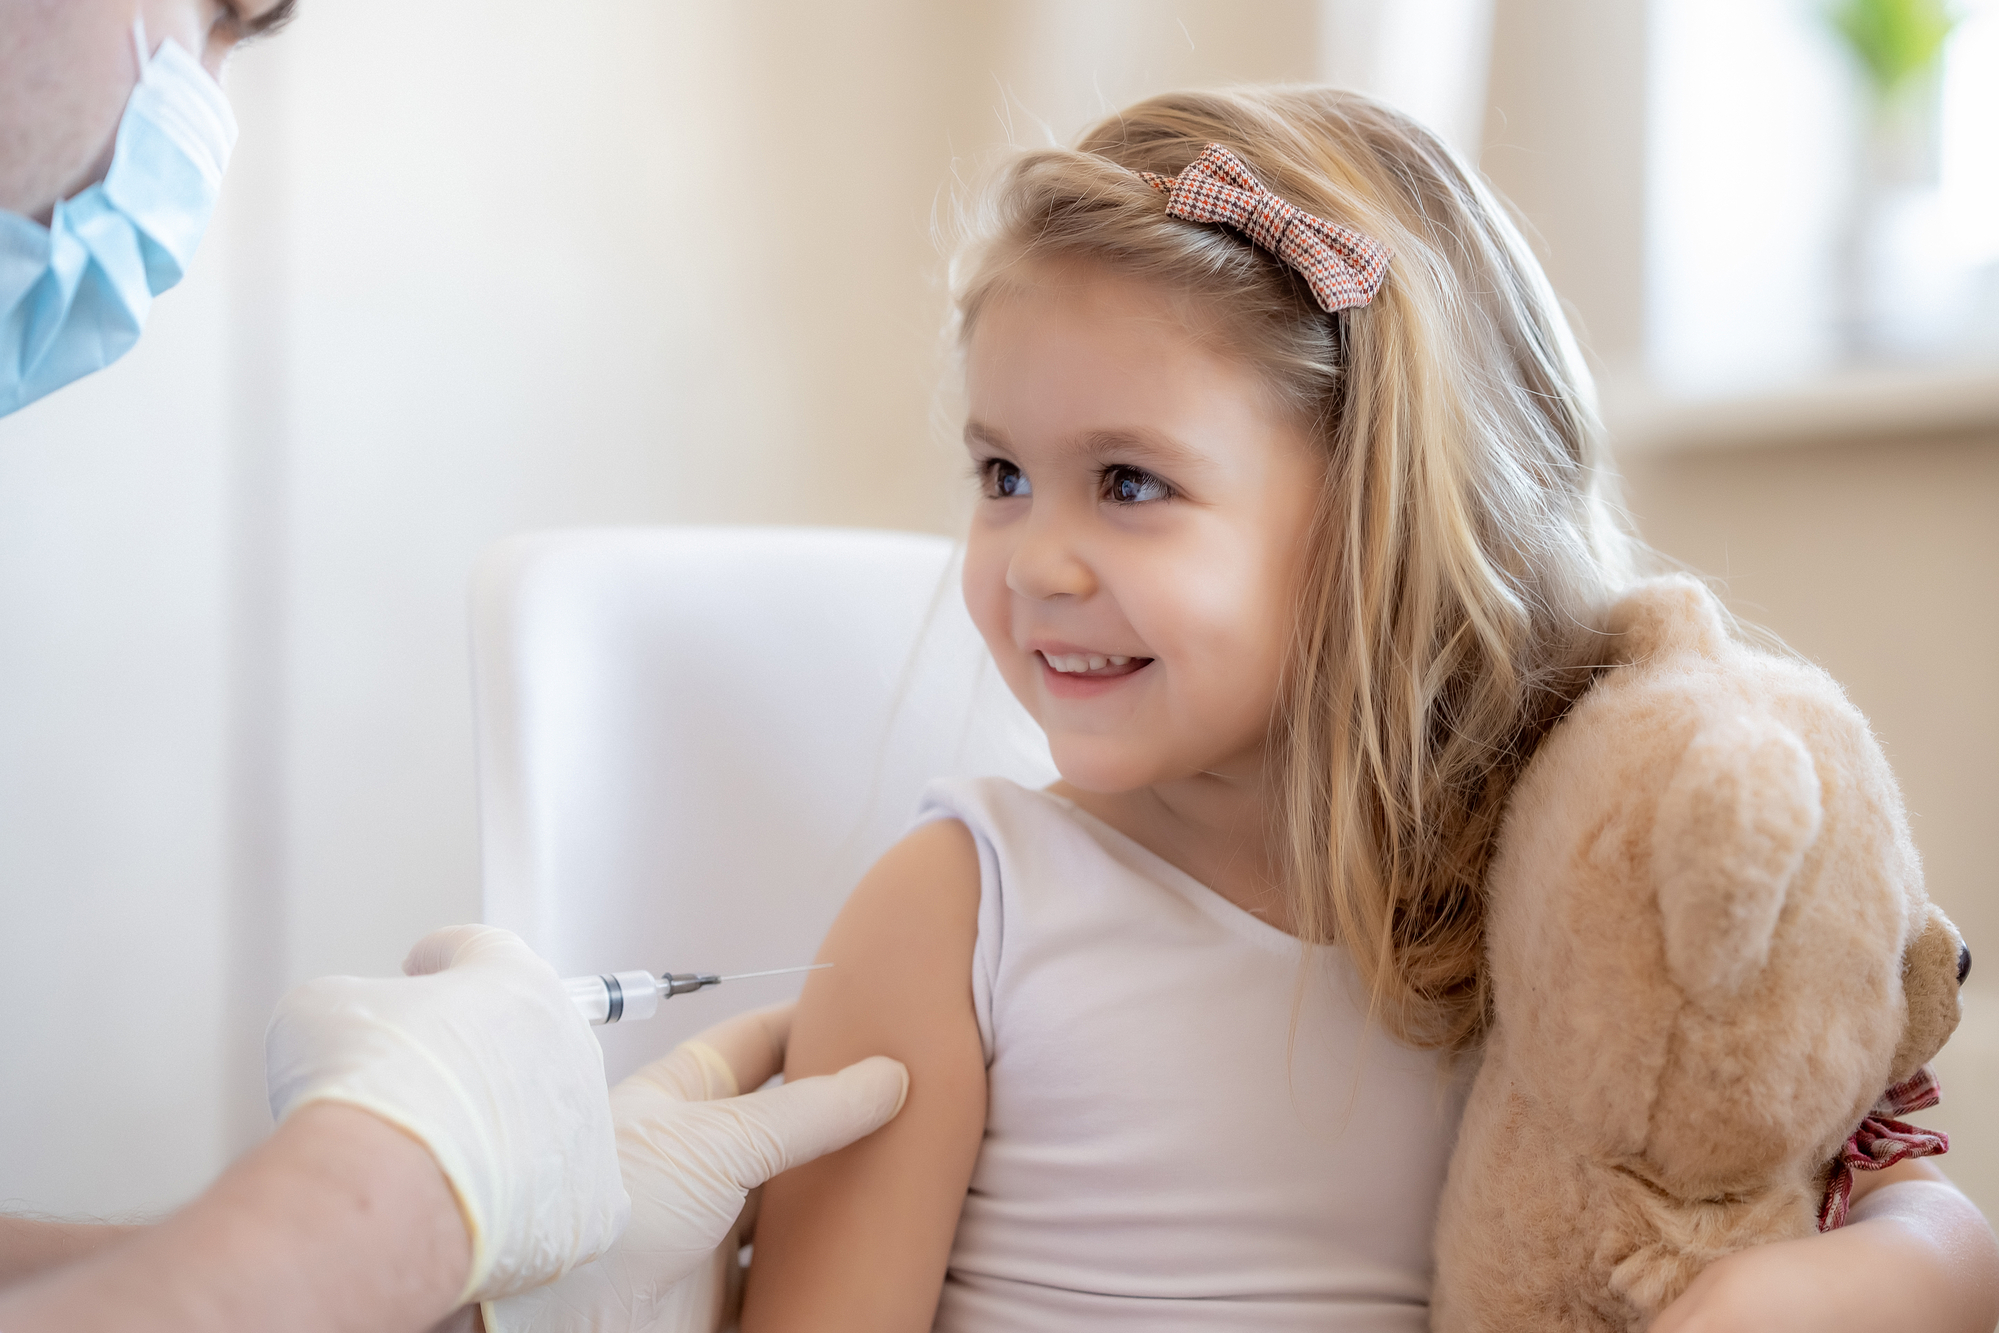 A smiling young girl receiving a flu vaccine in her arm while holding a teddy bear